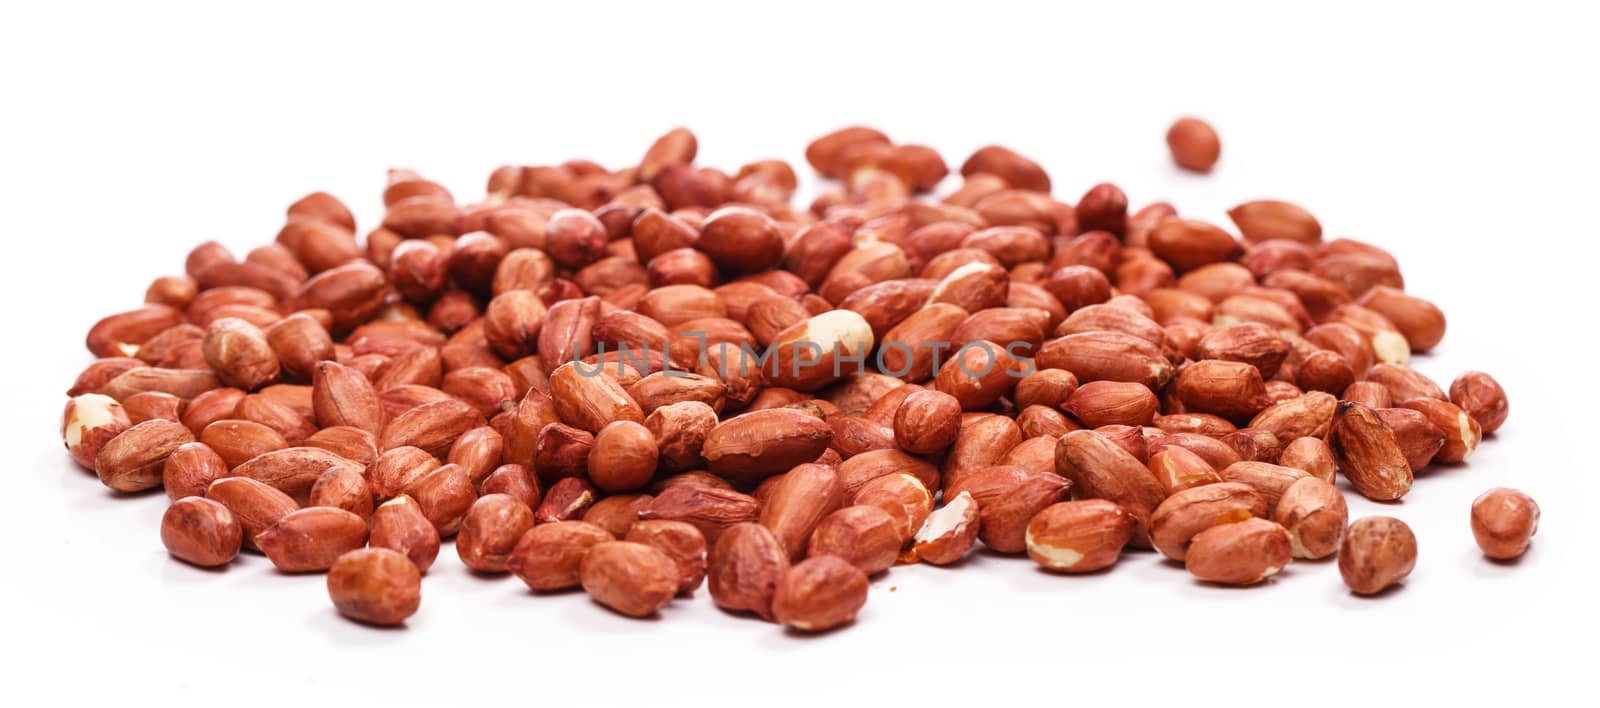 Delicious peanuts on a white background